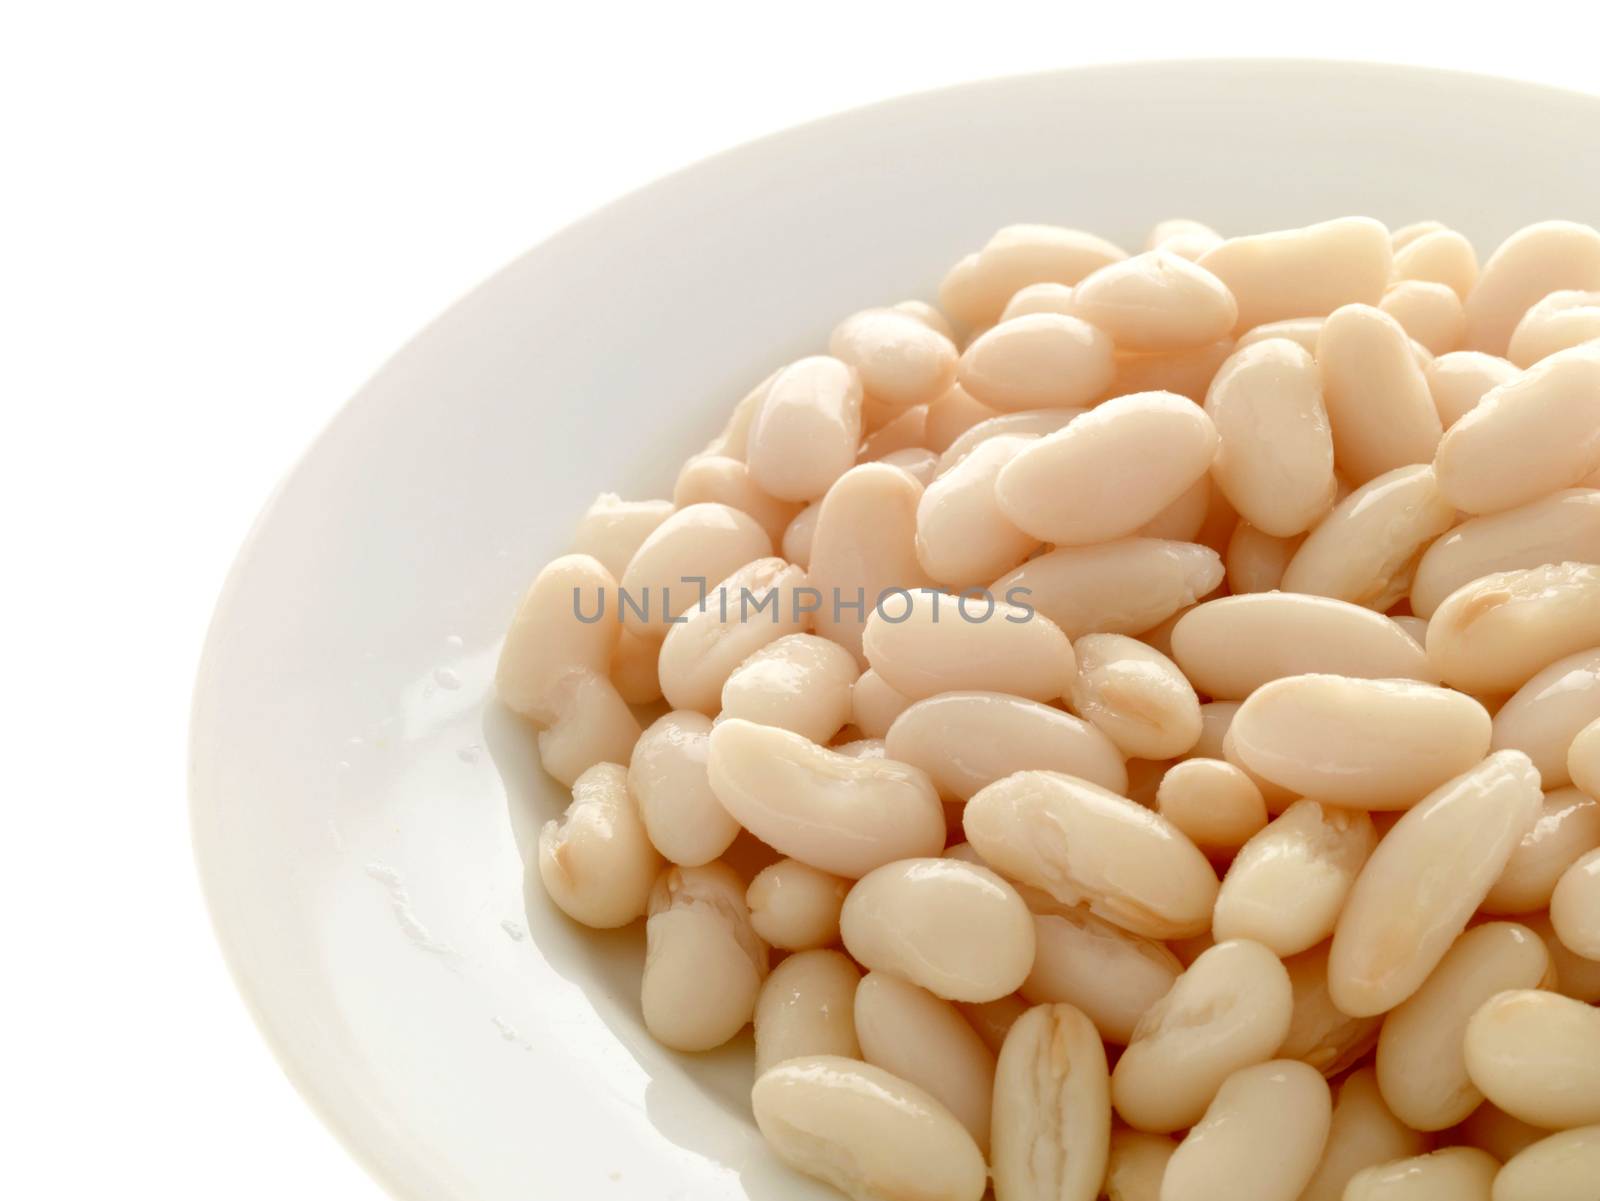 Cannellini Beans by Whiteboxmedia